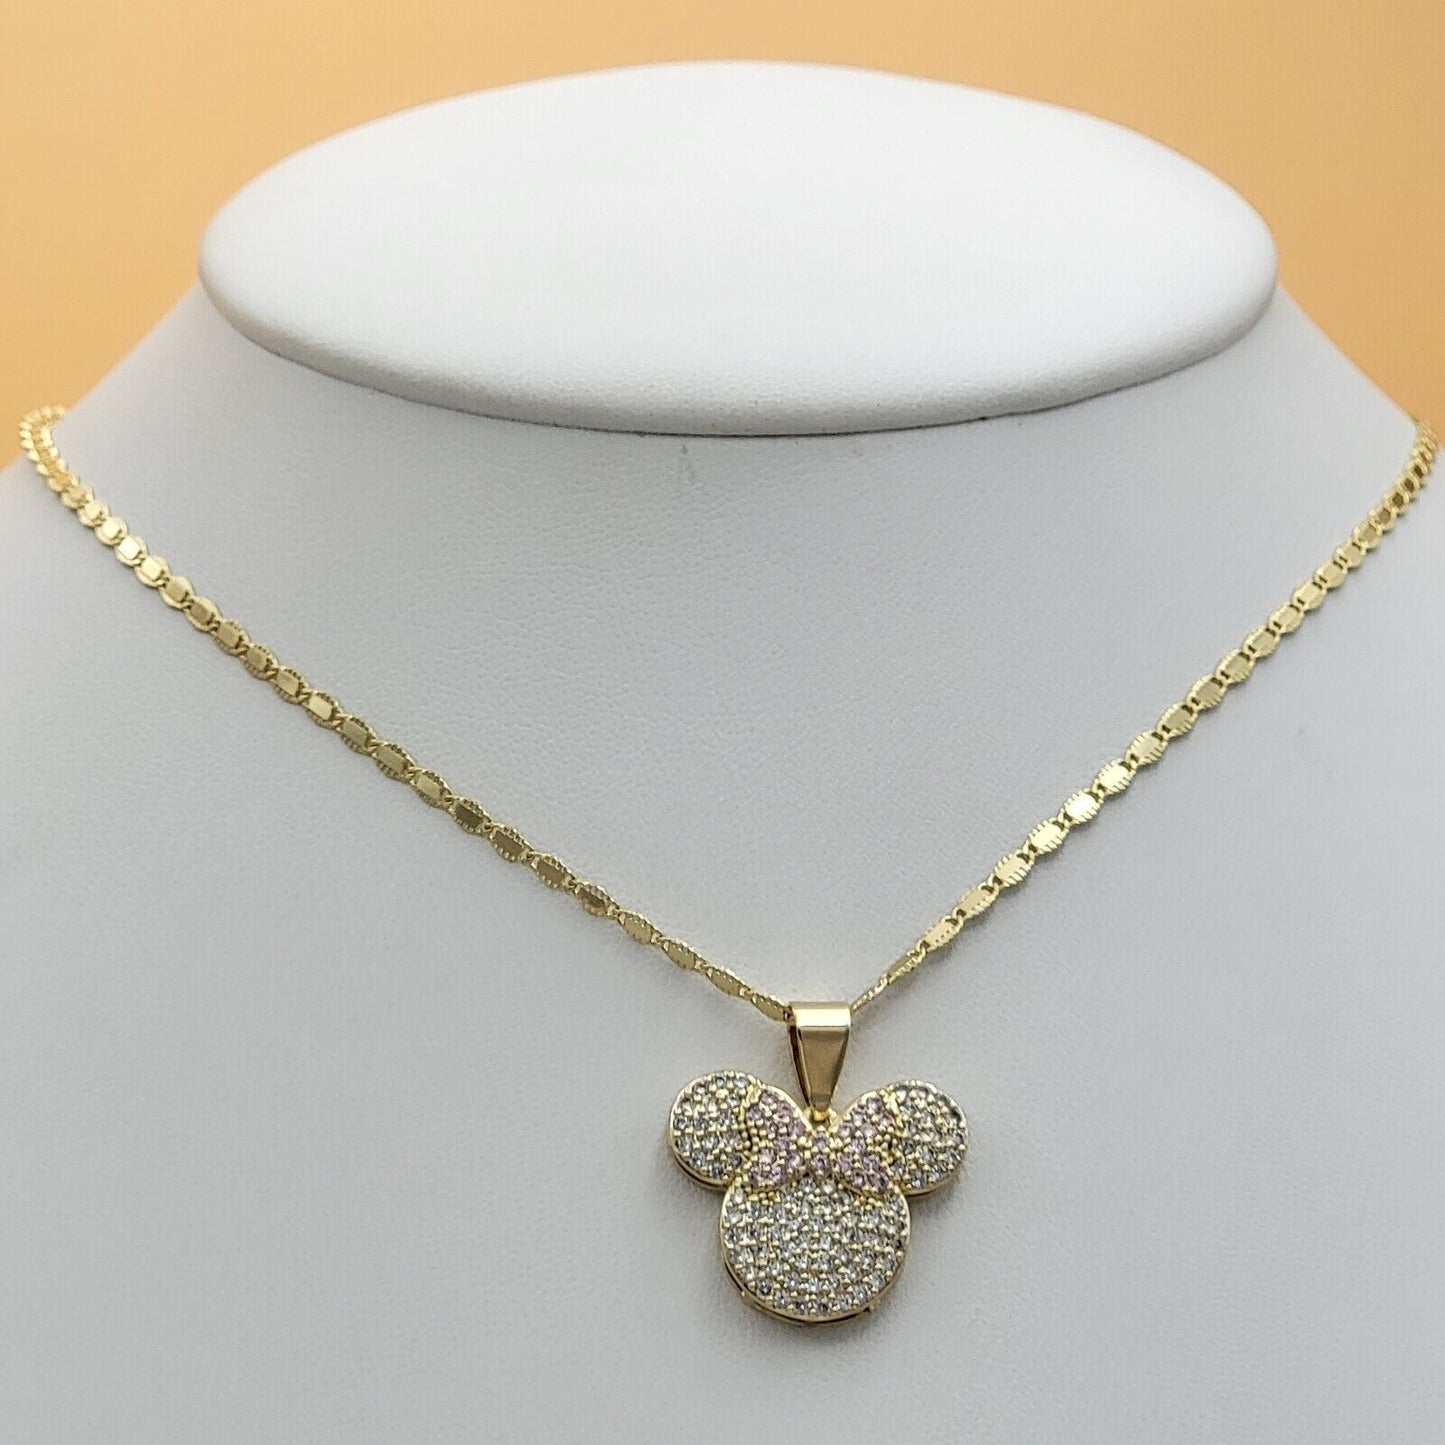 Necklaces - 14K Gold Plated. Cute mouse silhouette with Bow Pendant & Chain.